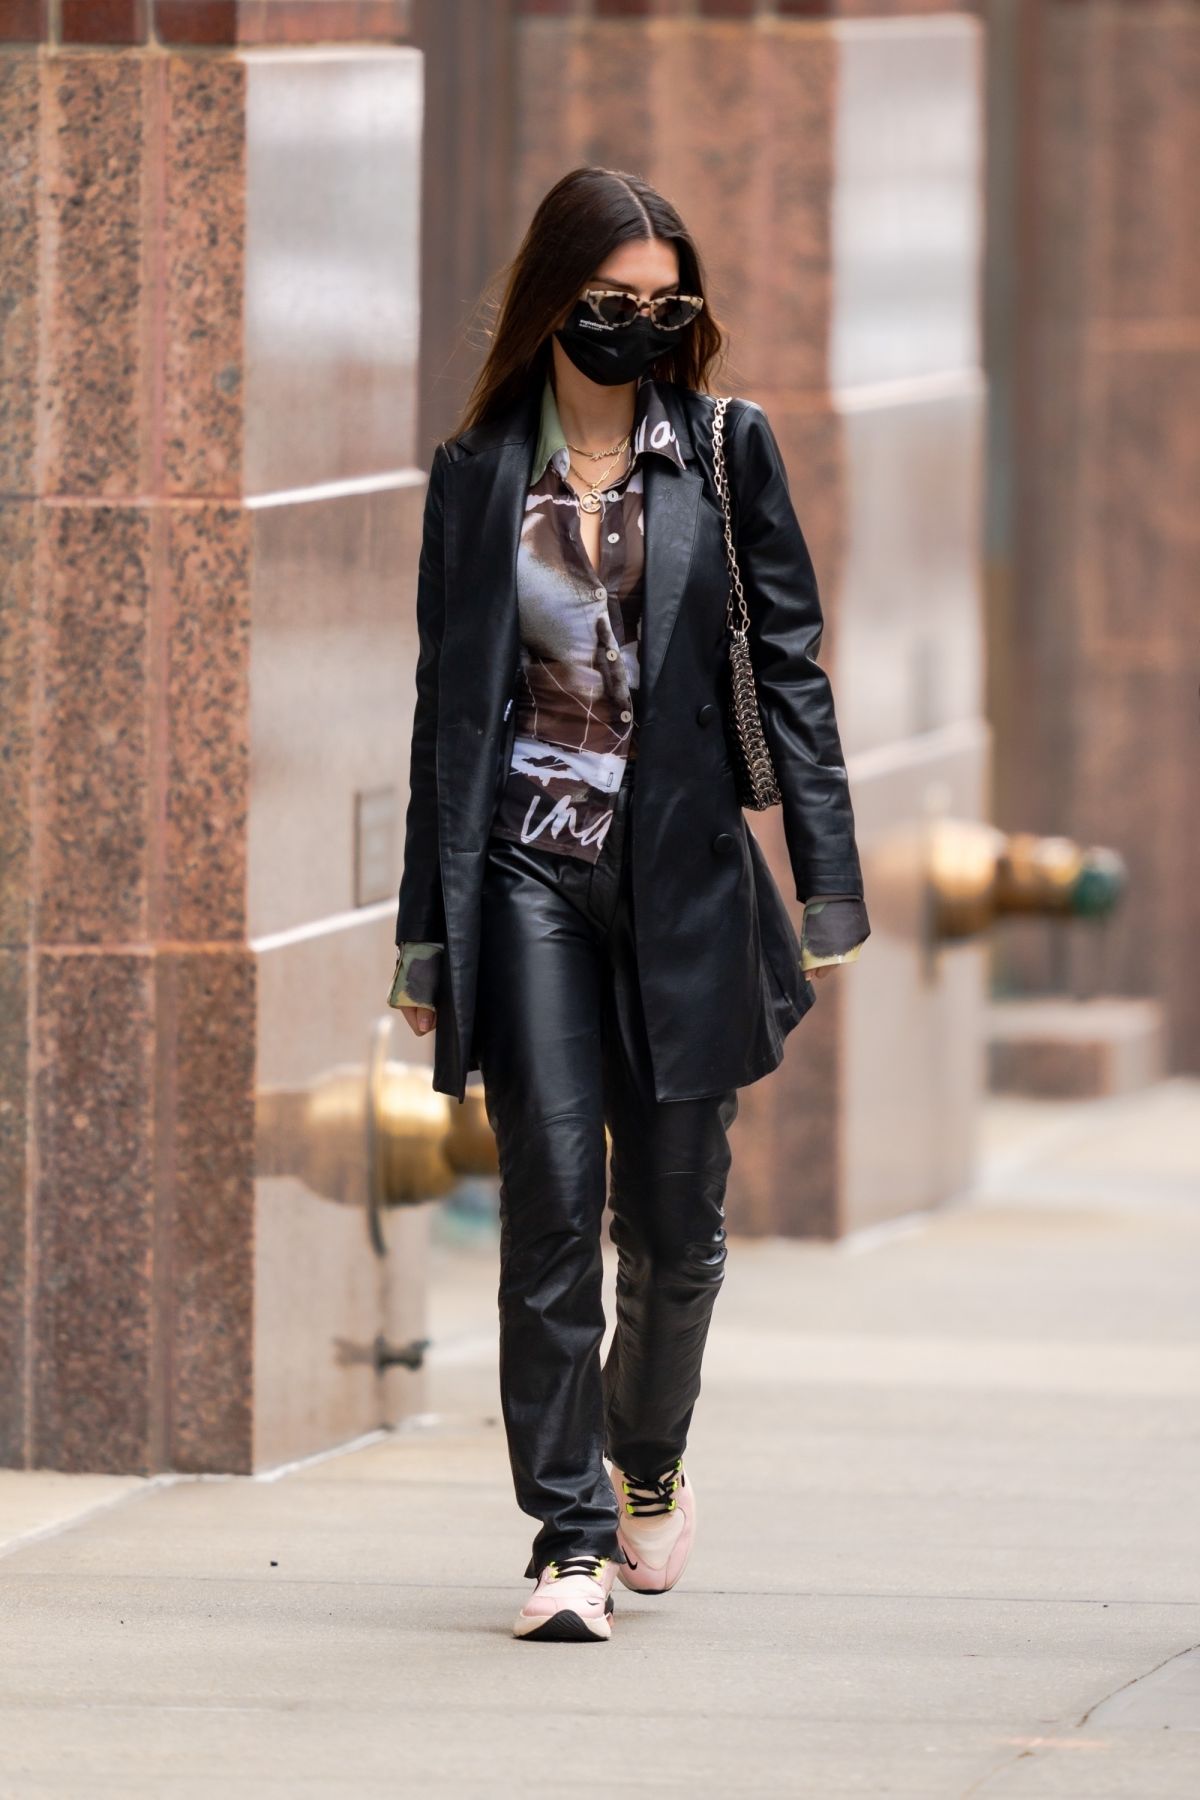 Emily Ratajkowski spotted in a Black Leather suit in New York City